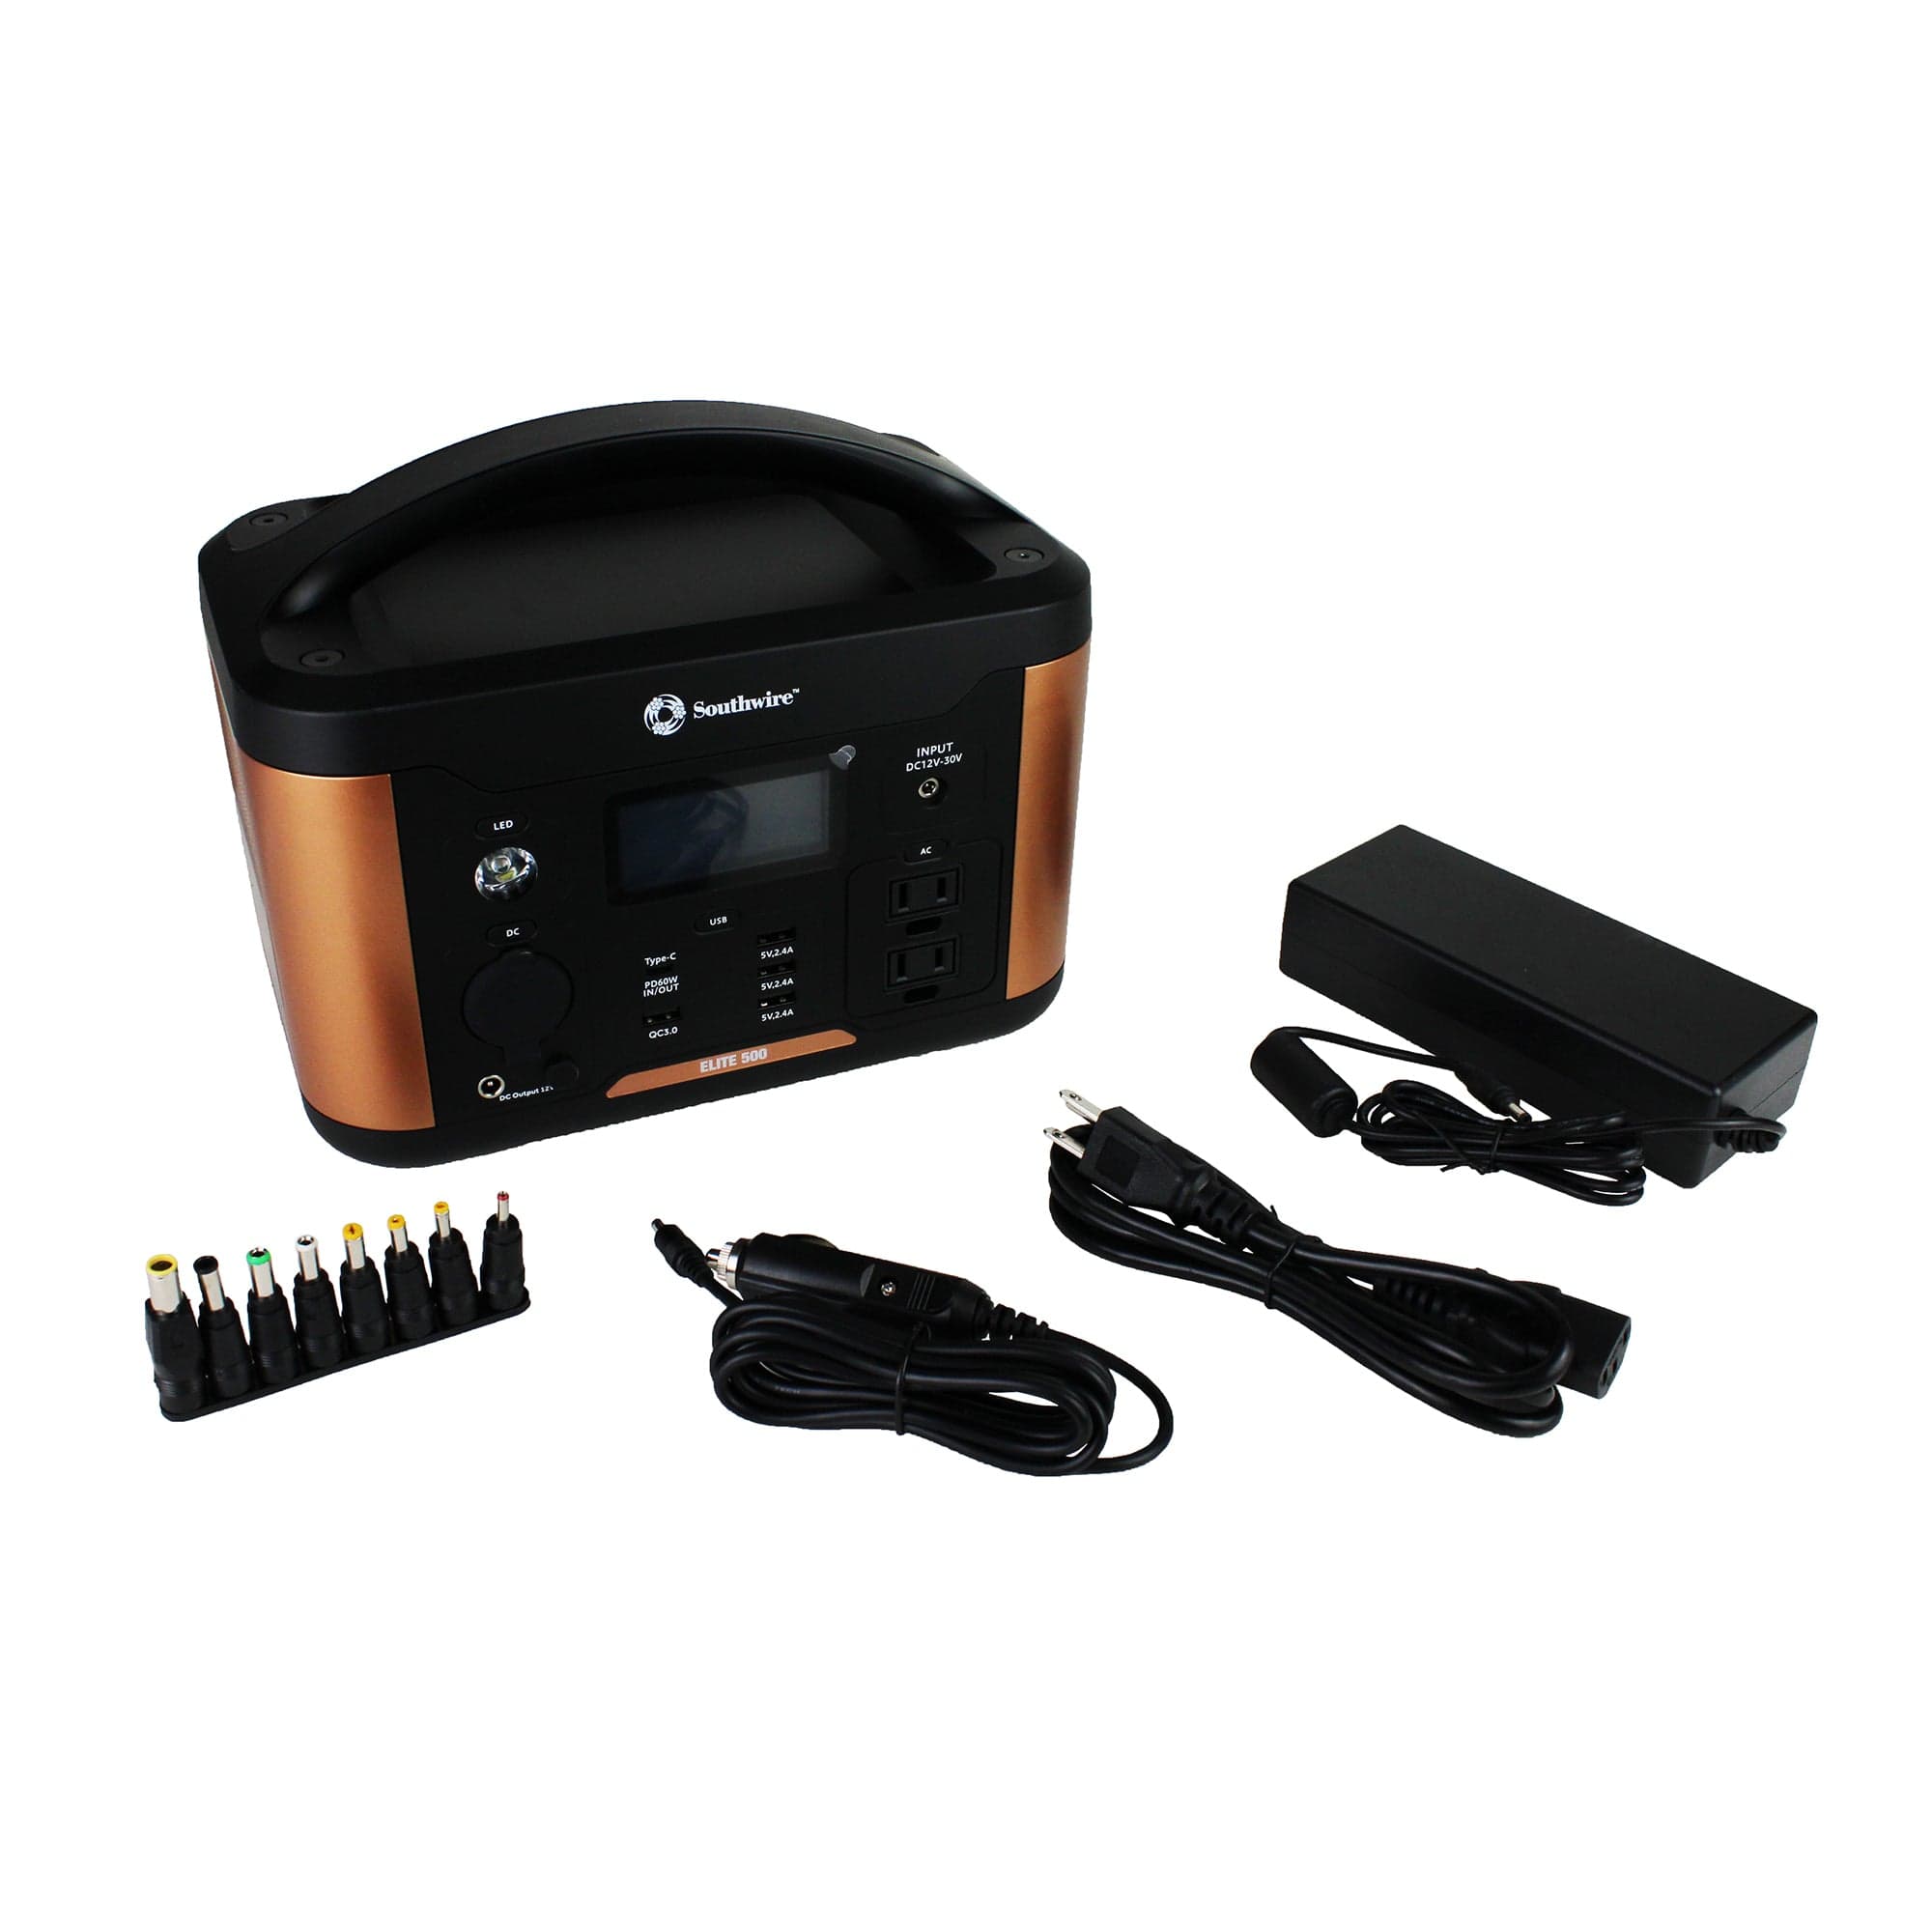 Southwire 53252 Elite 500 Series Portable Power Station W/ AC & DC Adapters